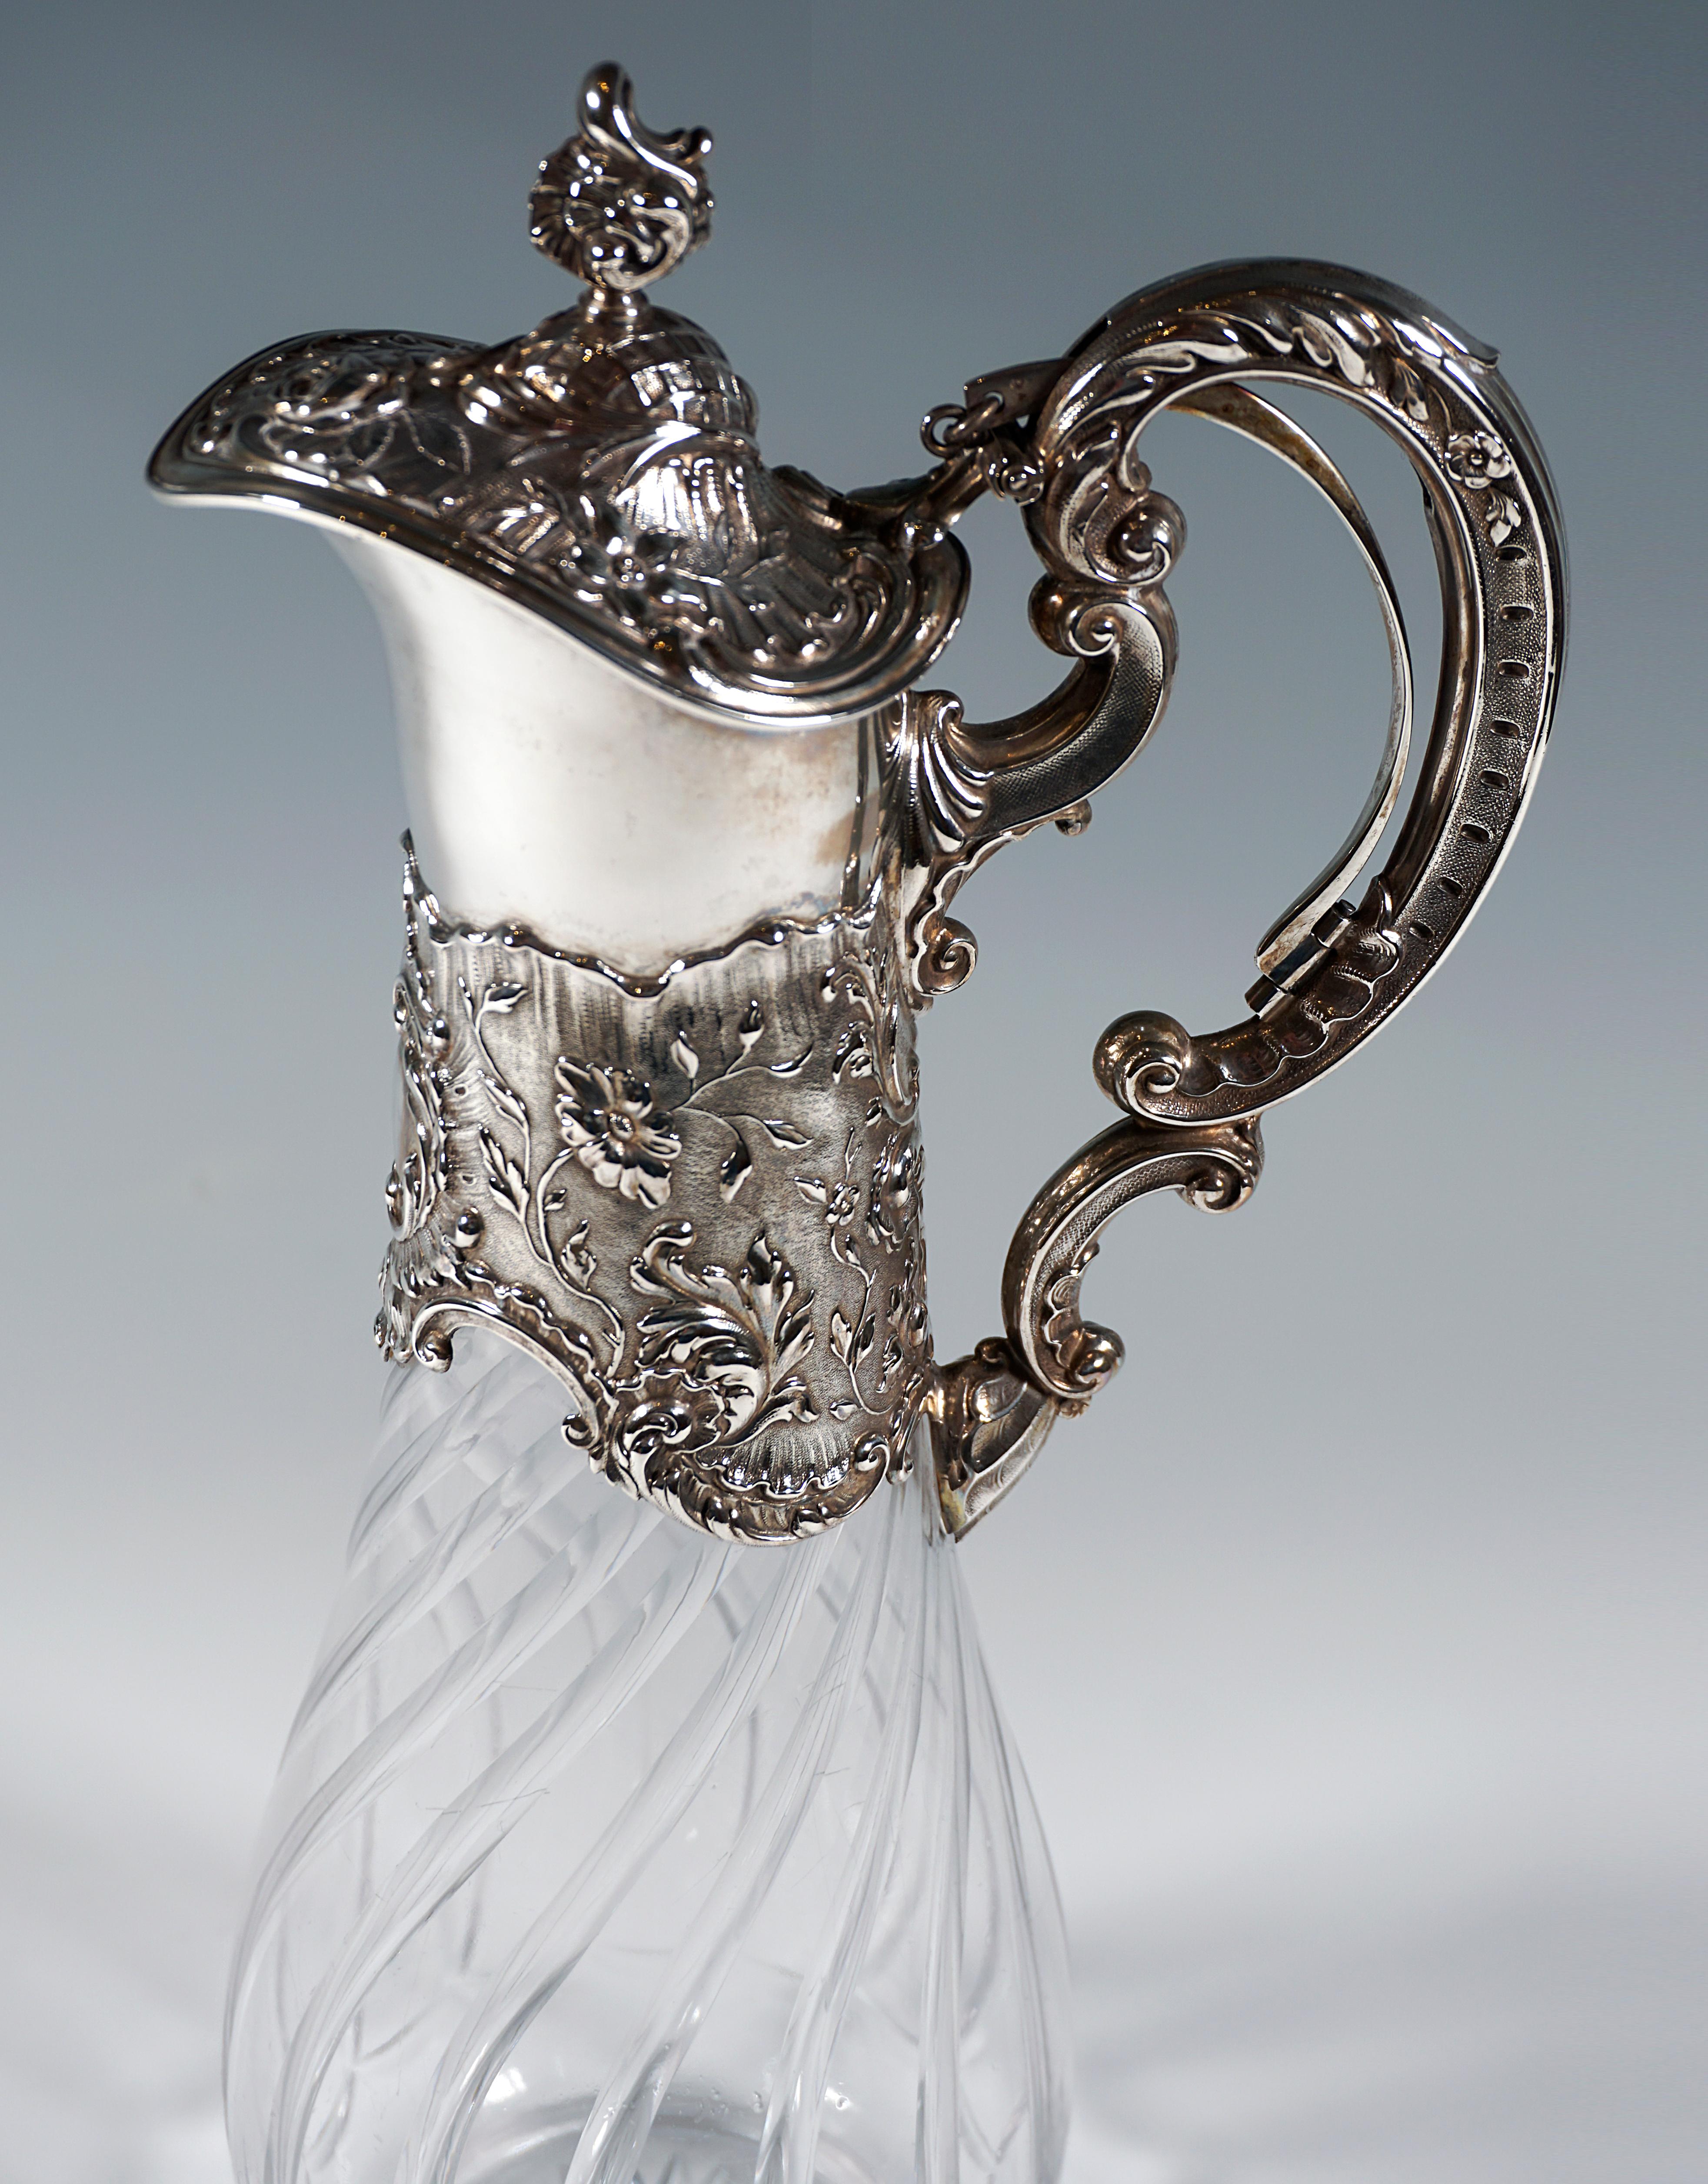 Late Victorian Historicism Glass Carafe with Silver Mount & Pull Mechanism, Koch & Bergfeld